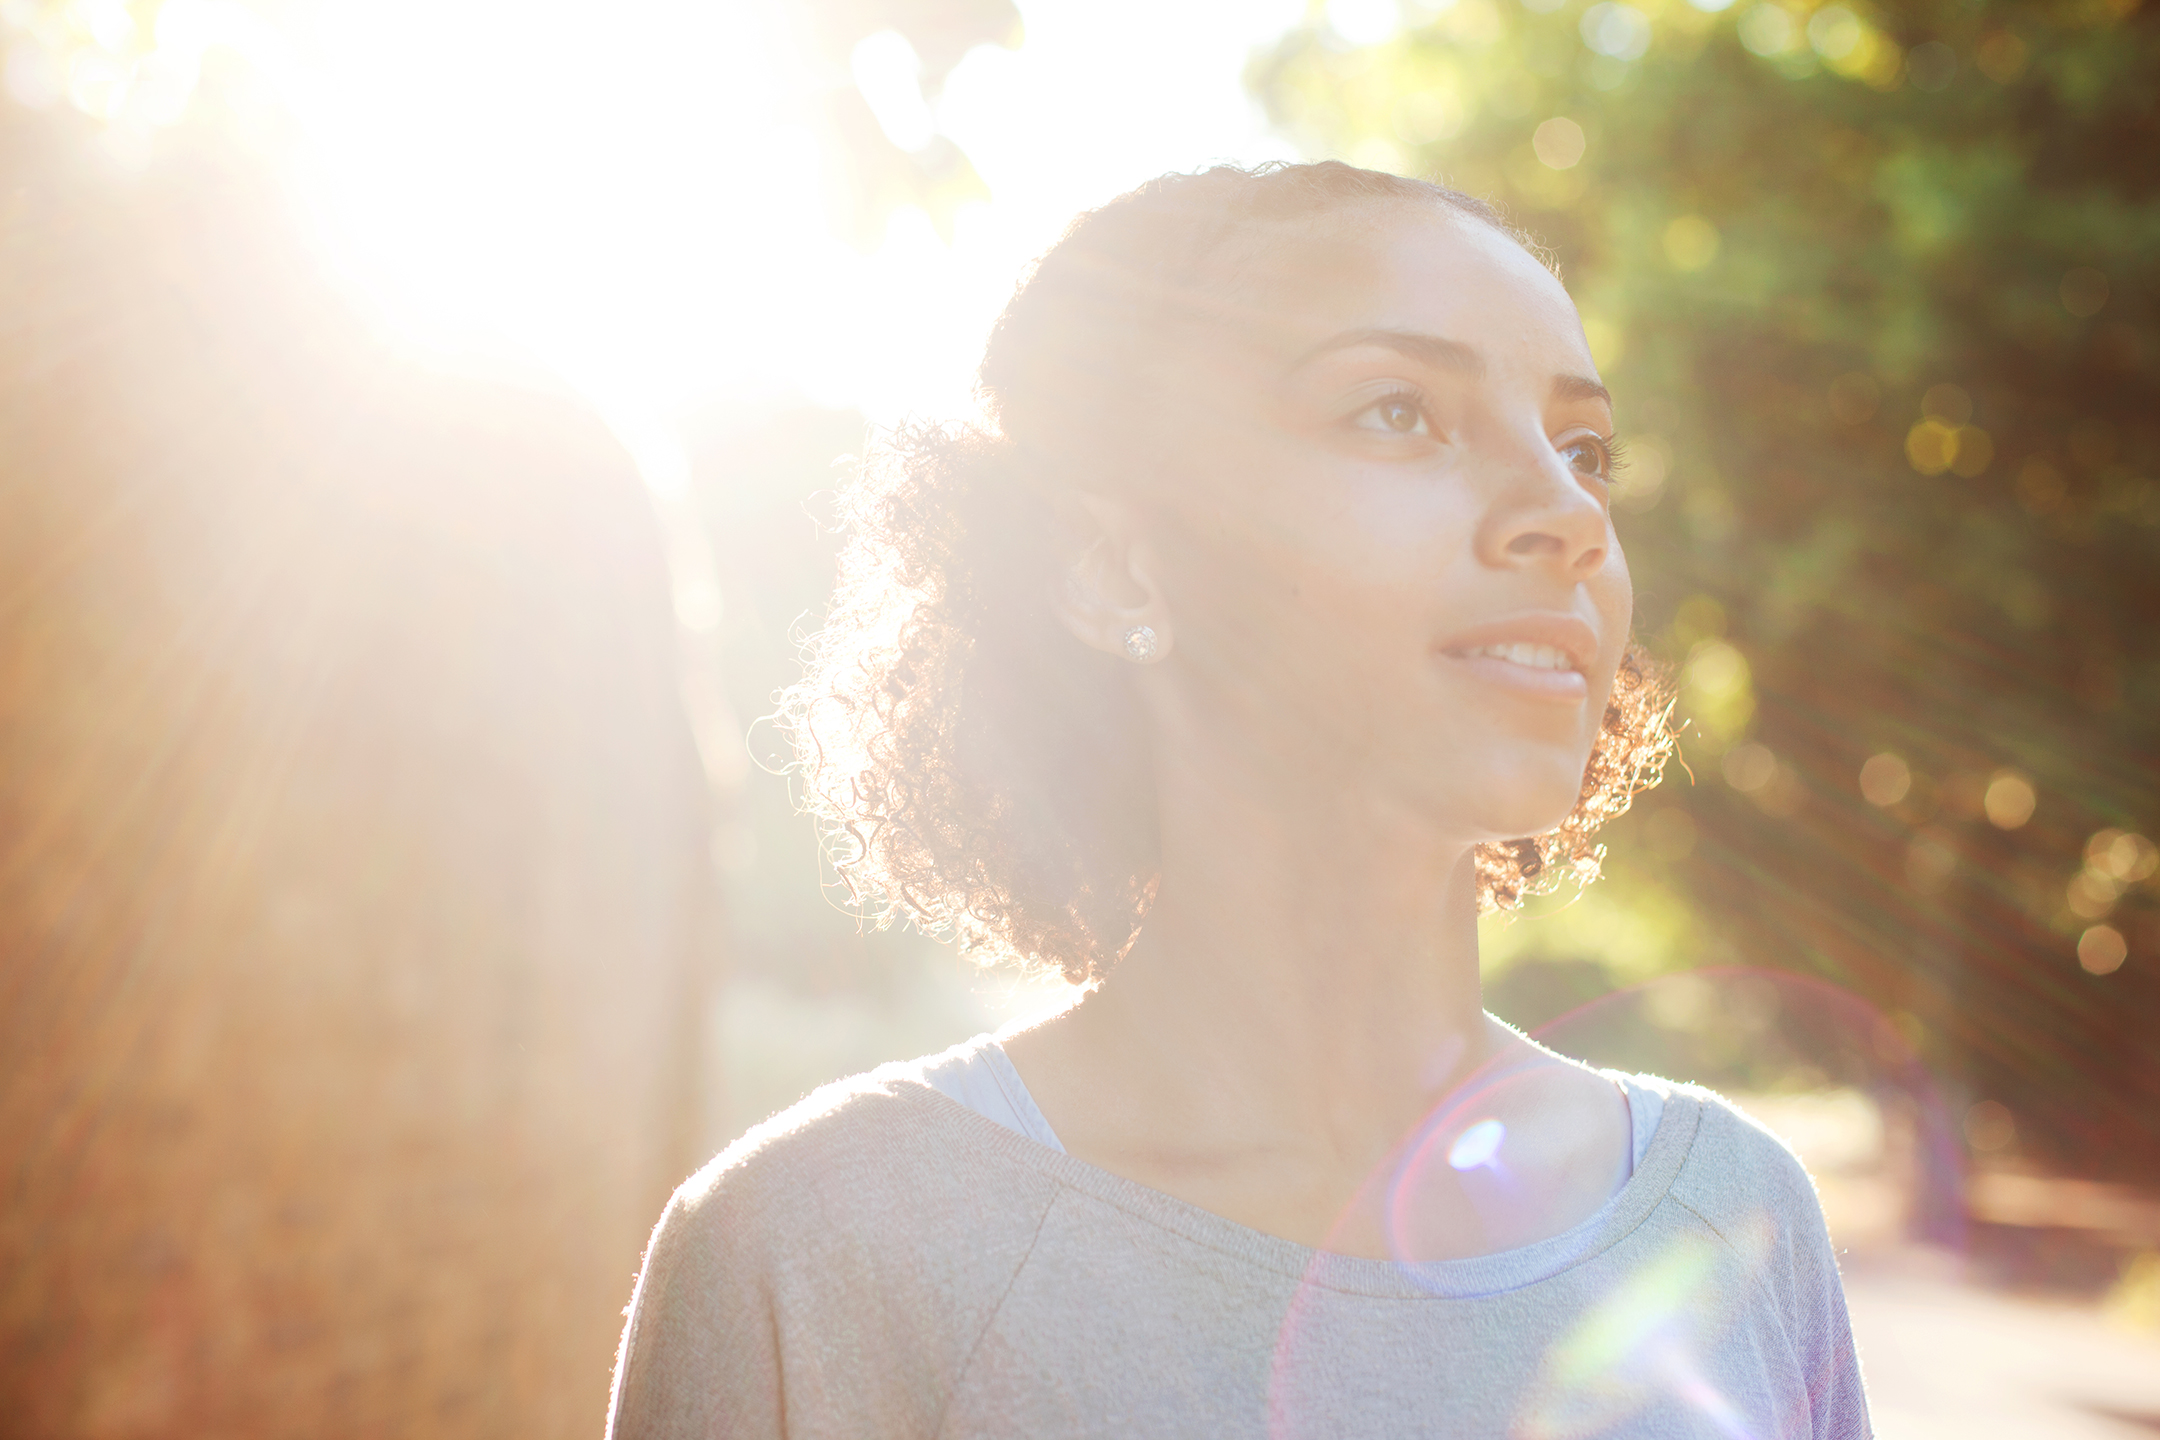 Young Black woman smiling as the sun forms a bright corona behind her